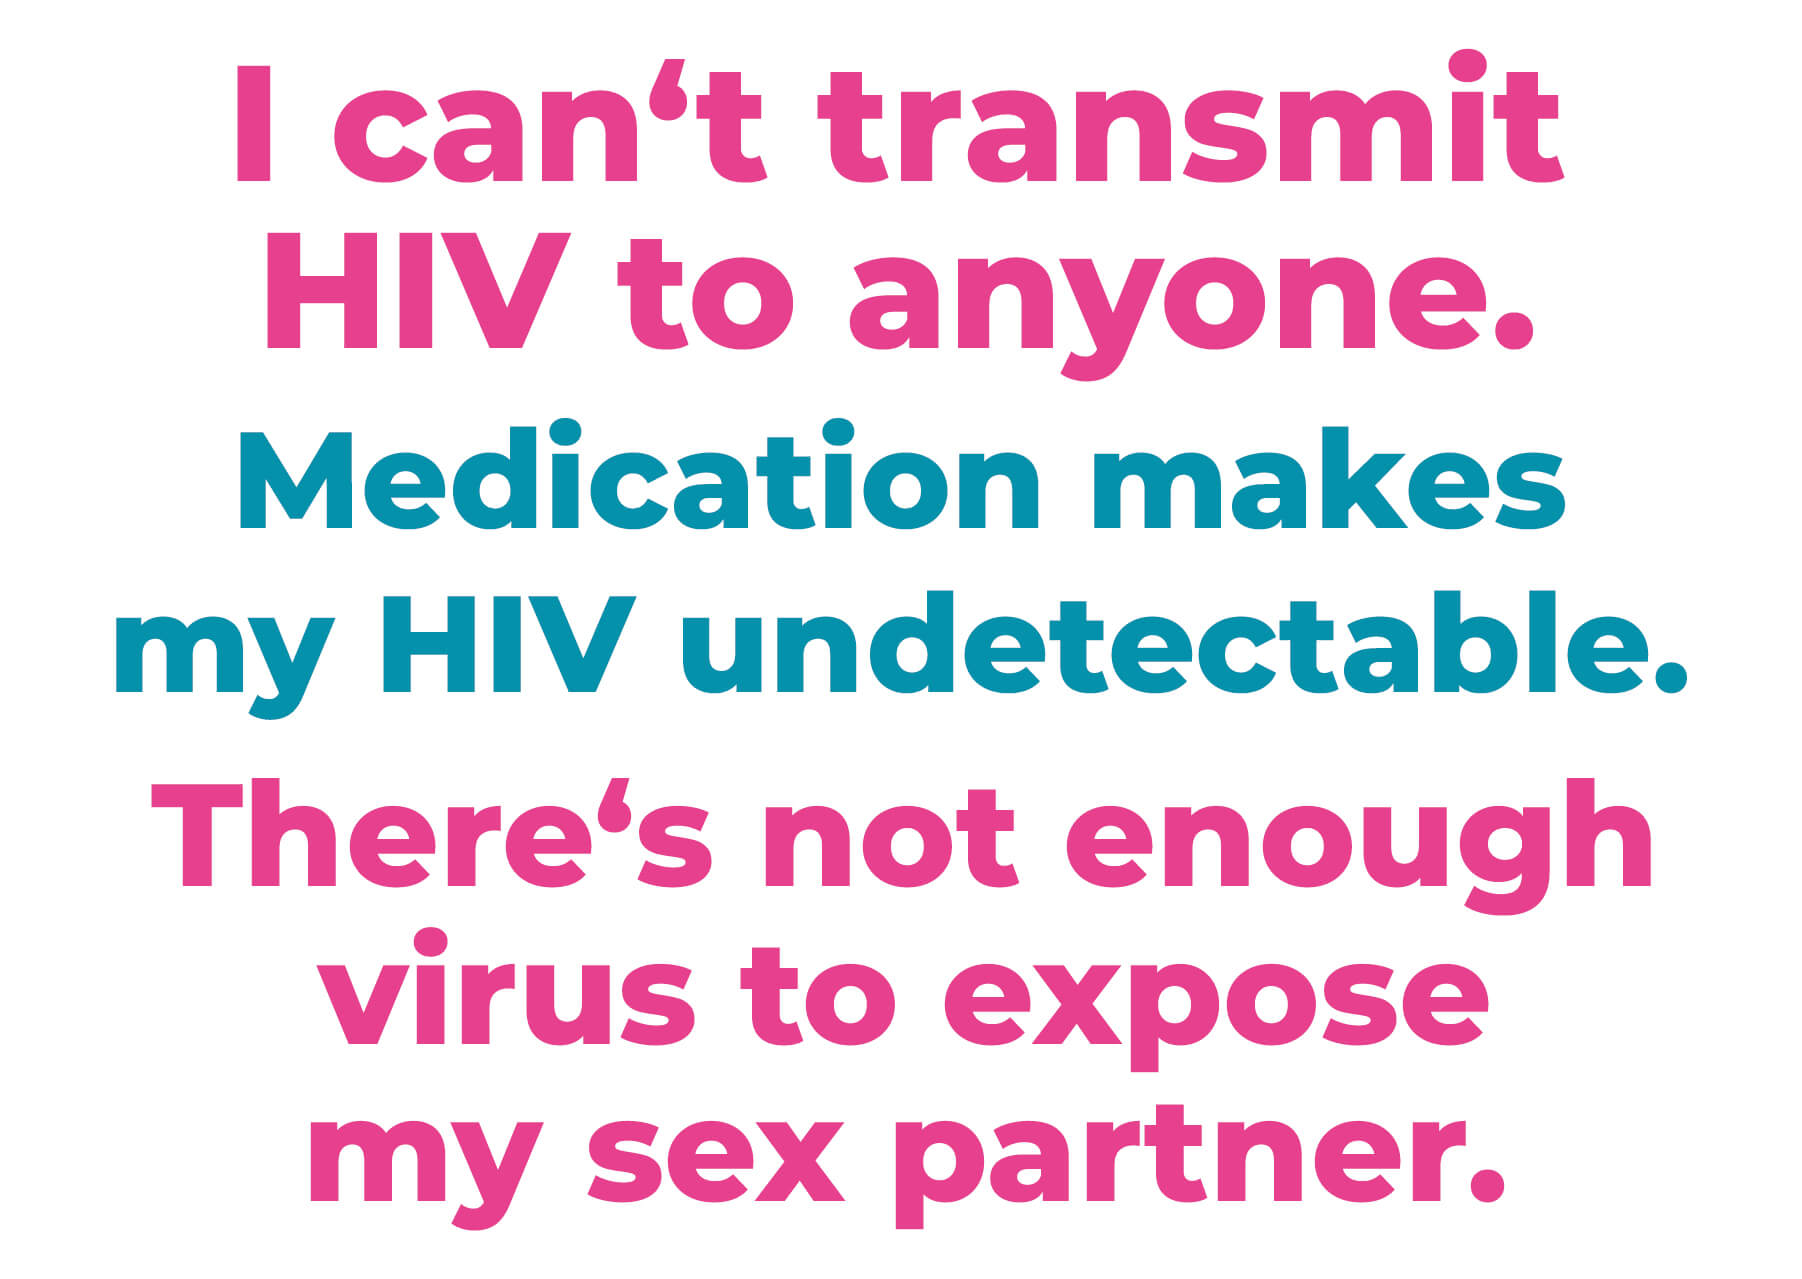 I can't transmit HIV to anyone. Medication makes my HIV undetectable. There's not enough virus to expose my sex partner